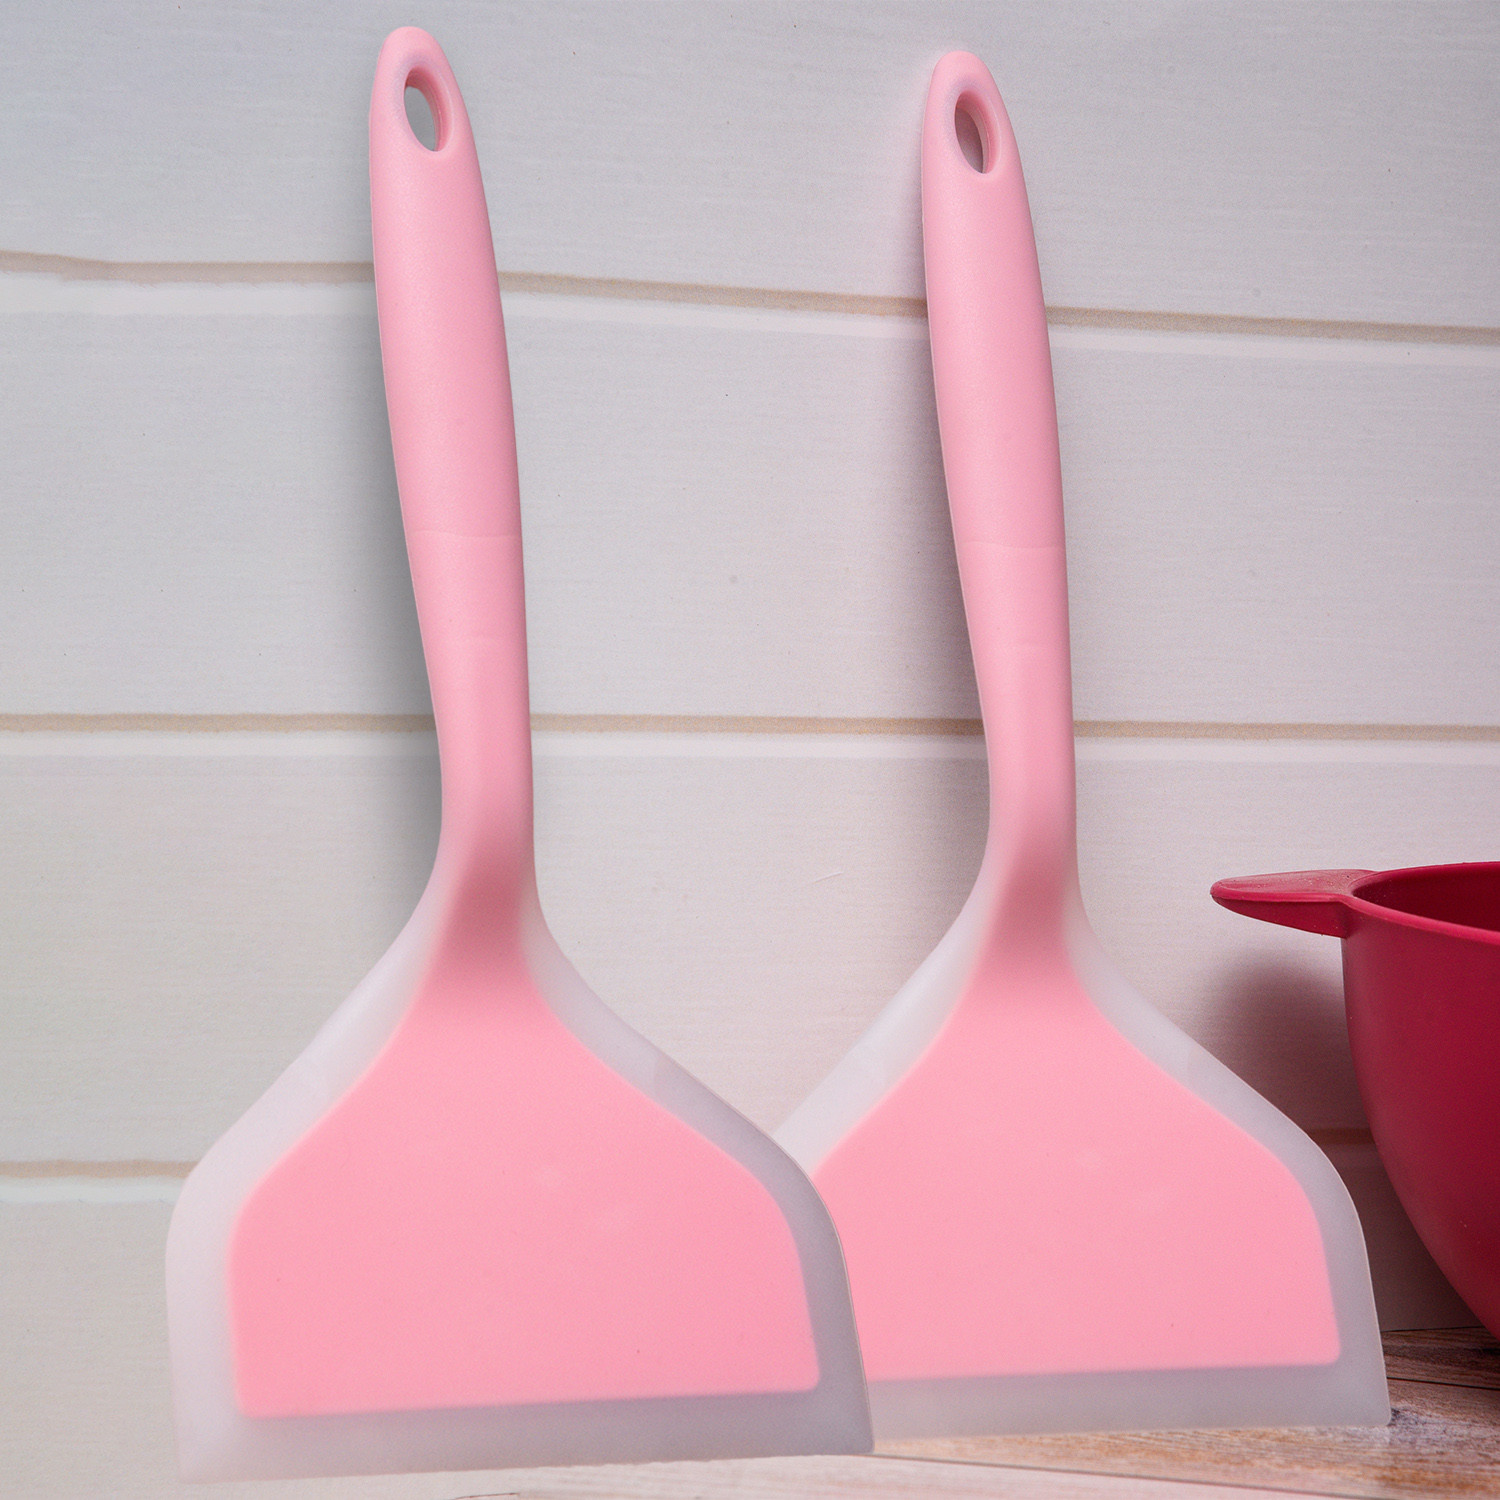 Kuber Industries Turner | Silicone Wide Spatula Turner | Spatulas Turner for Nonstick Cookware | Omelette Turner for Cooking | Kitchen Turners | New Big Spatula | Pink